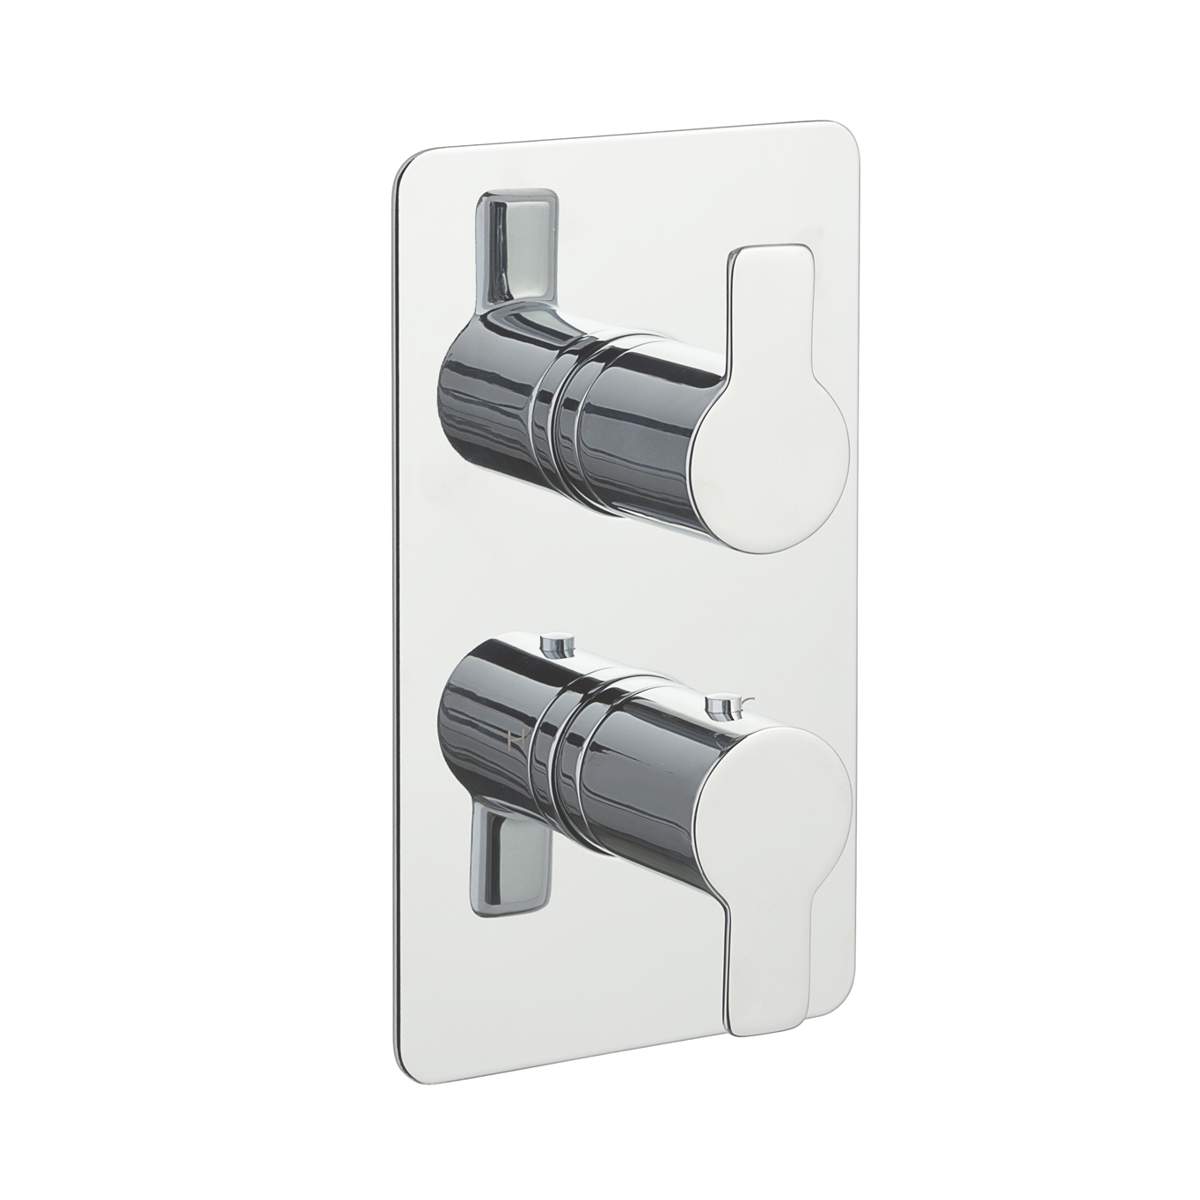 JTP Amore 1 Outlet Thermostat (79651)